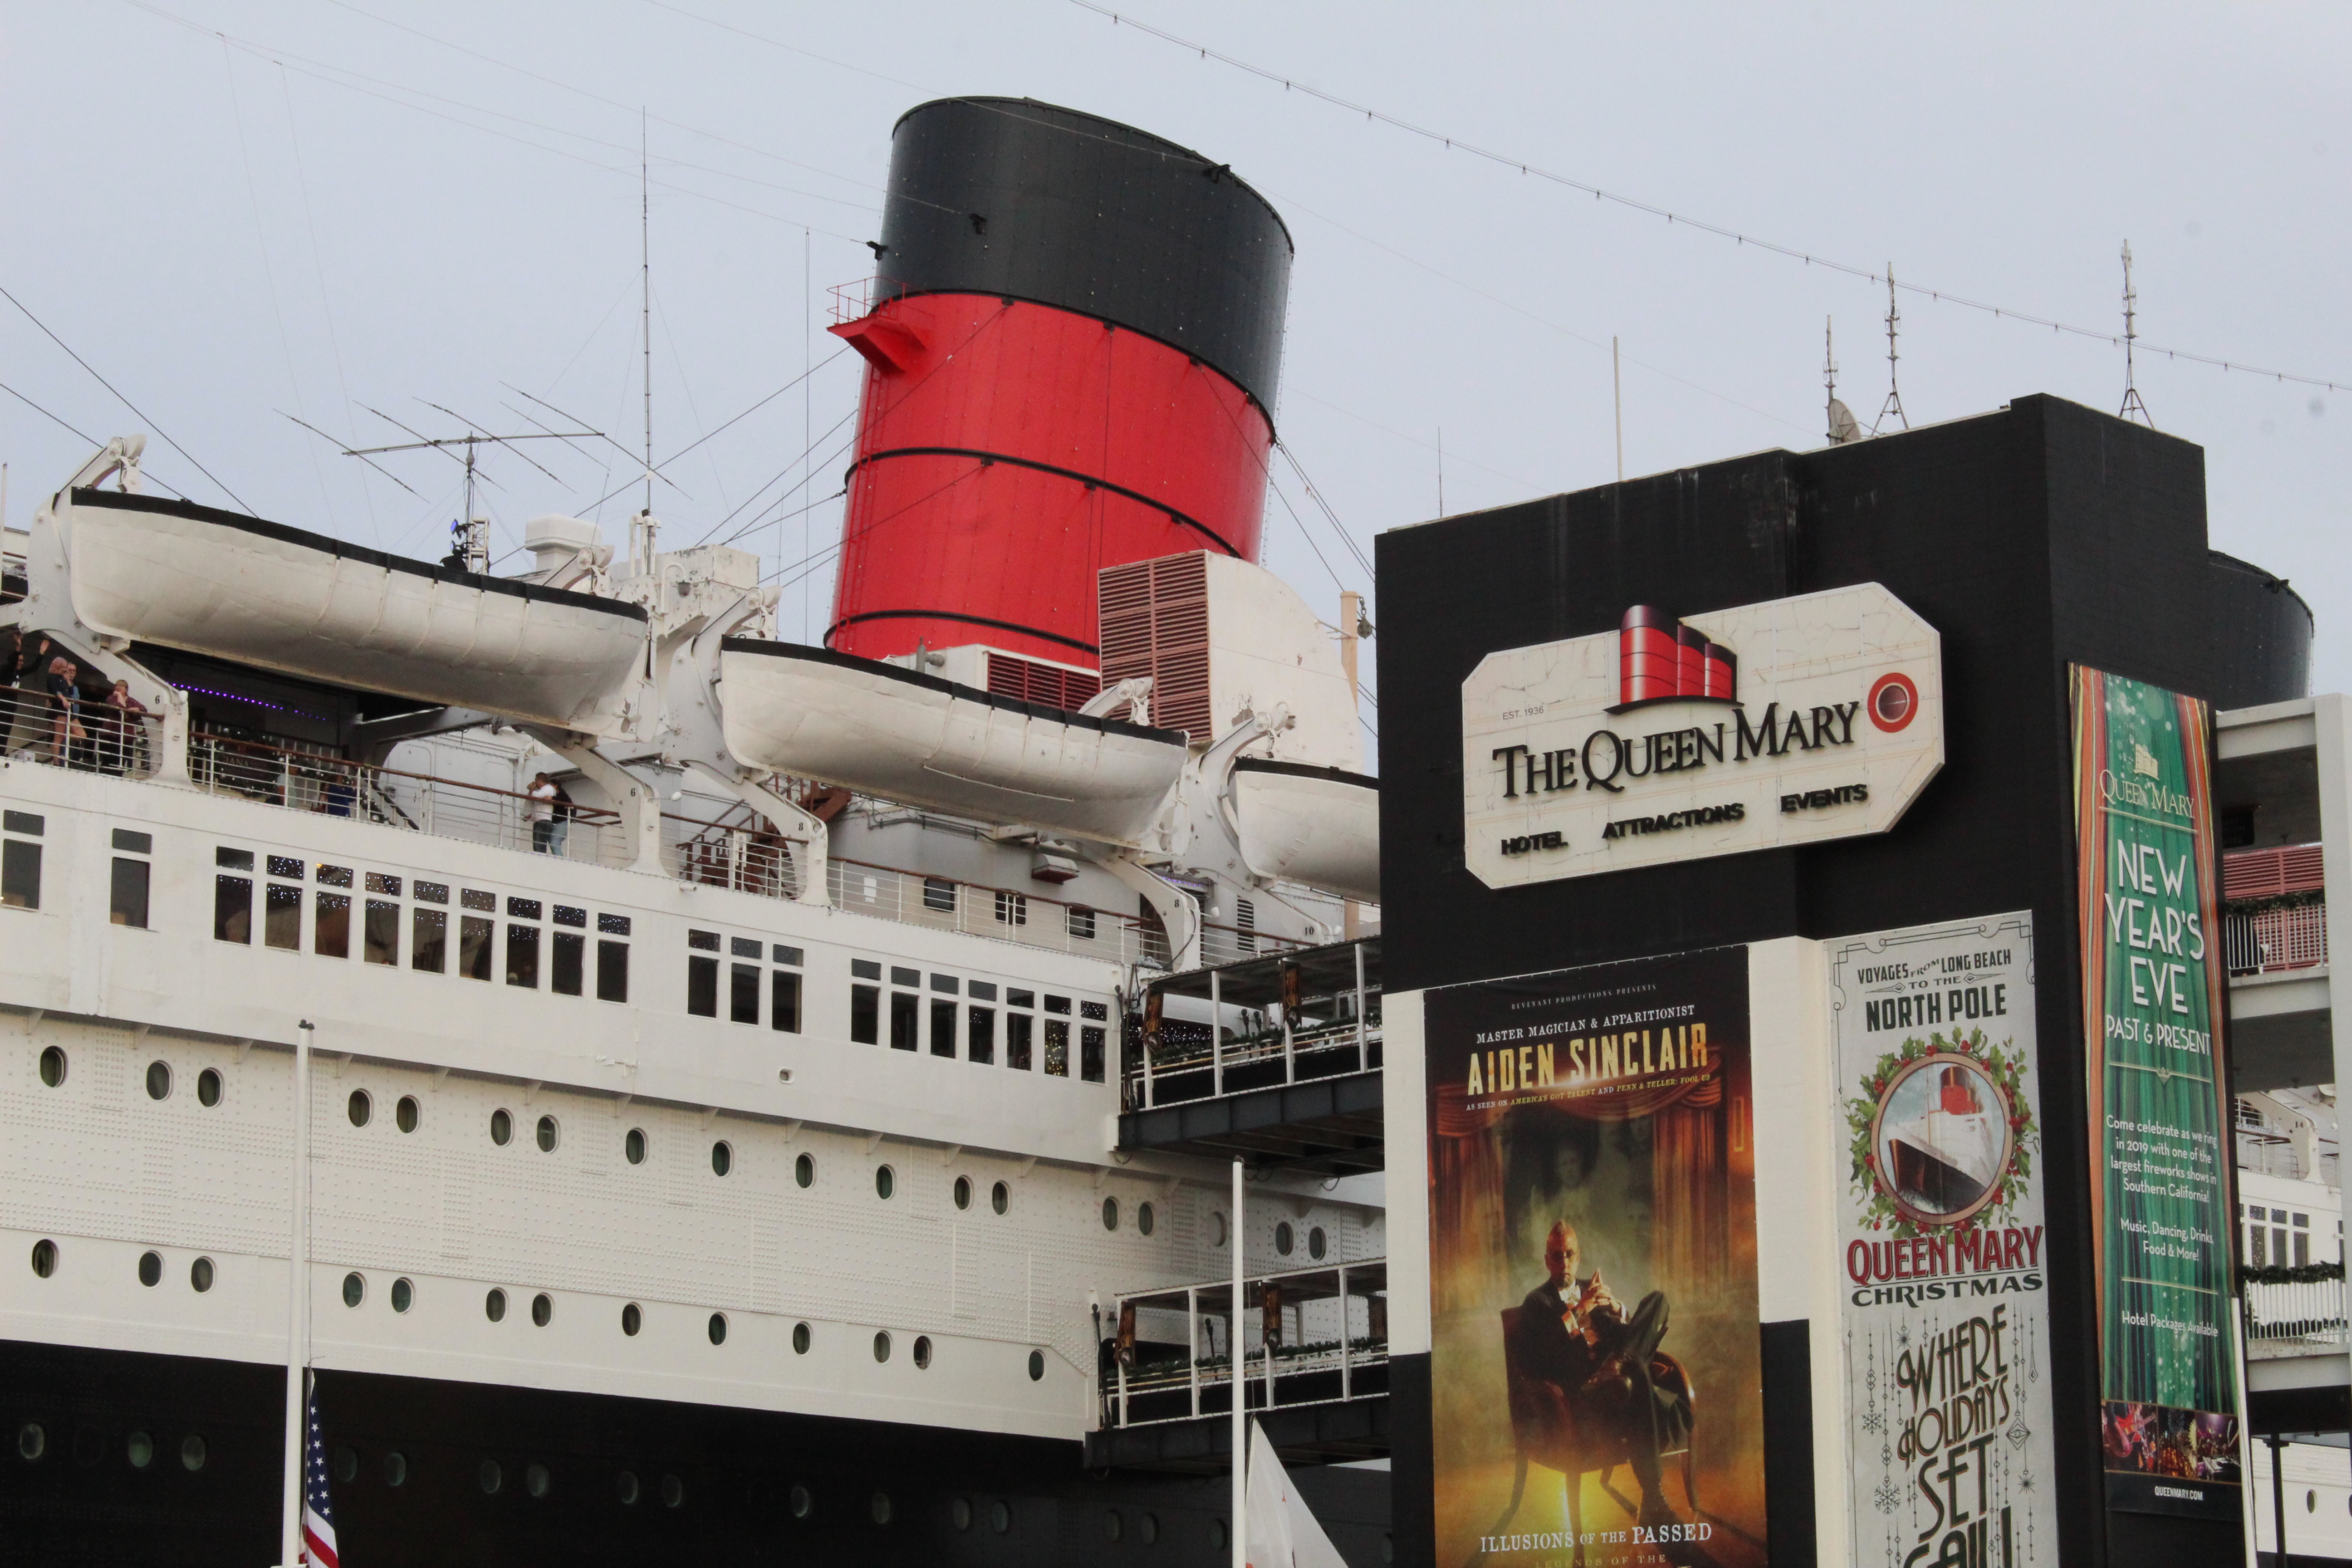 The Queen Mary Christmas